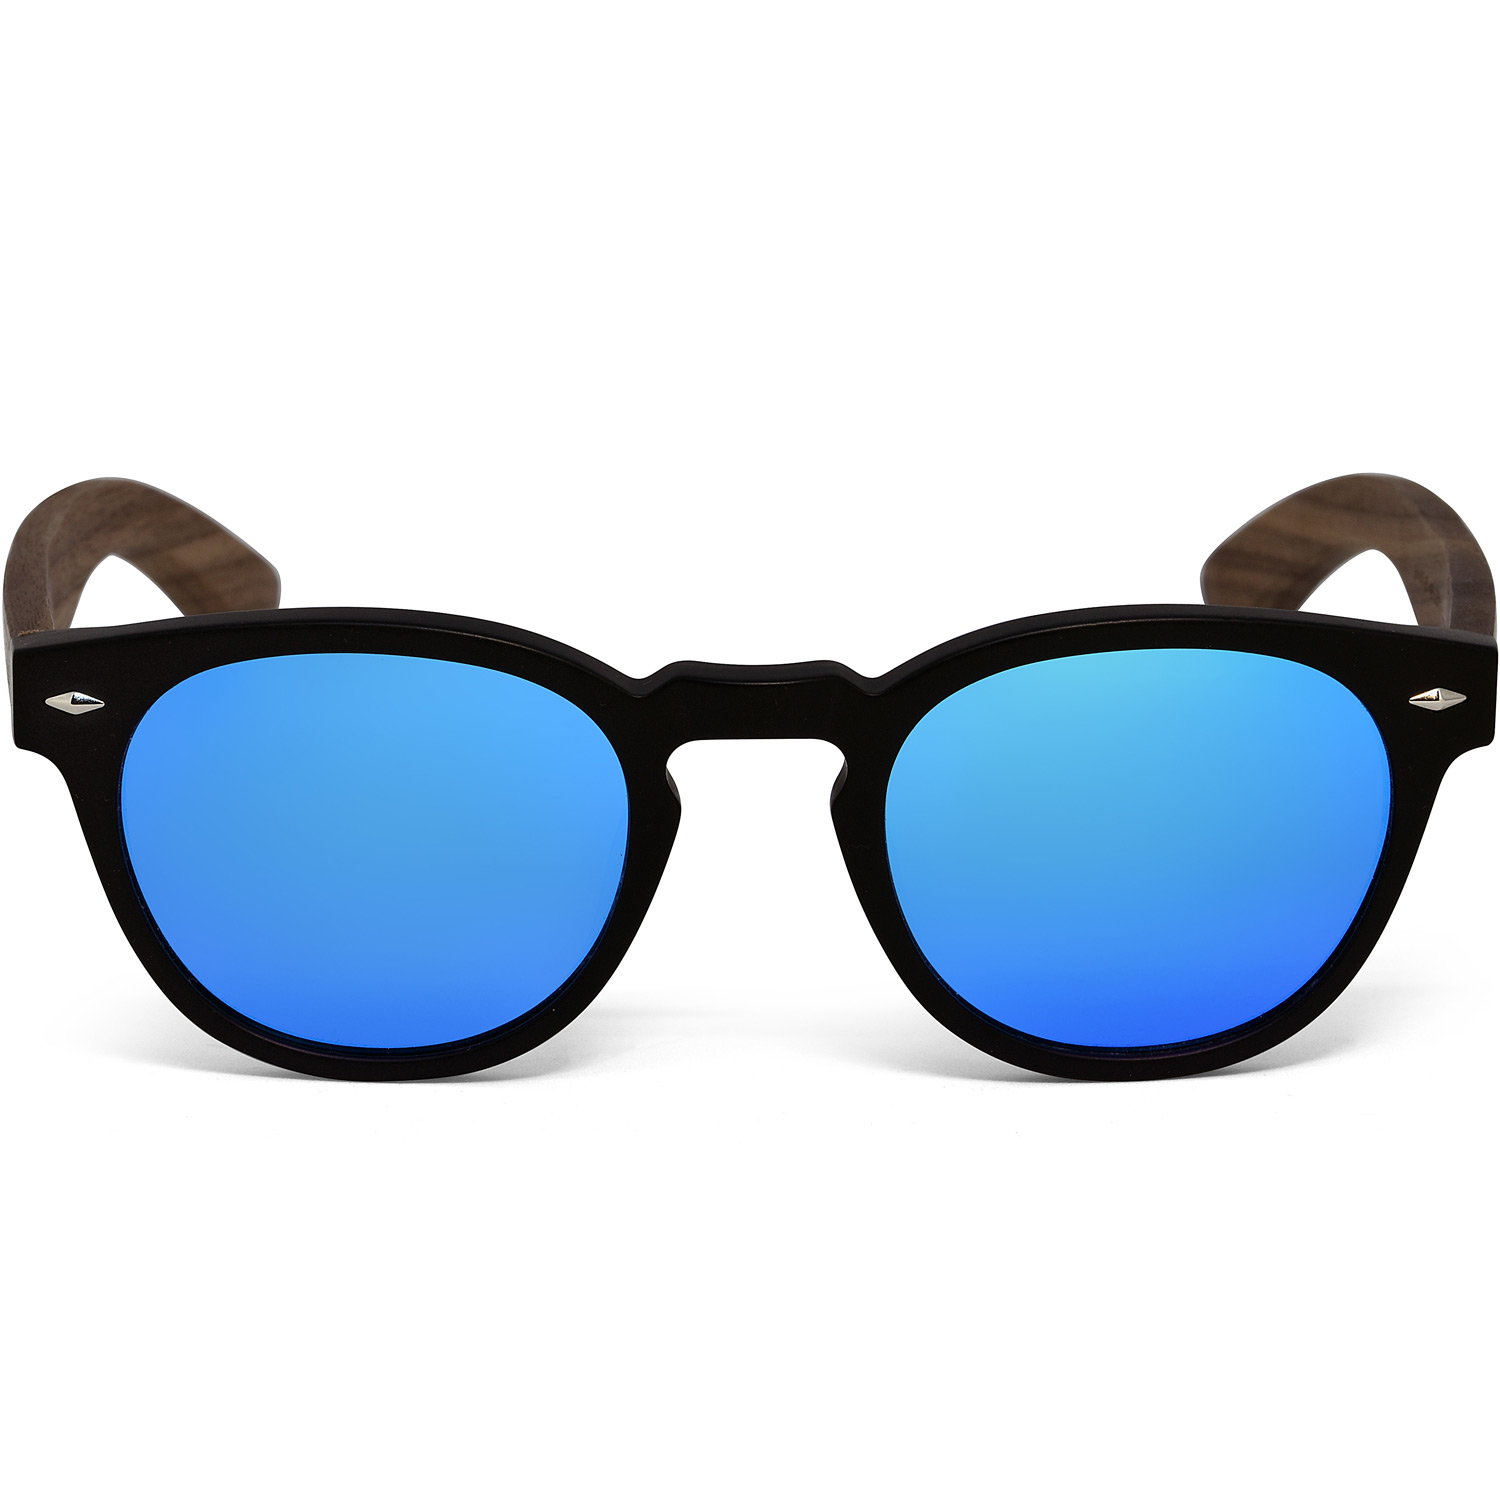 round walnut wood sunglasses blue mirrored lenses front